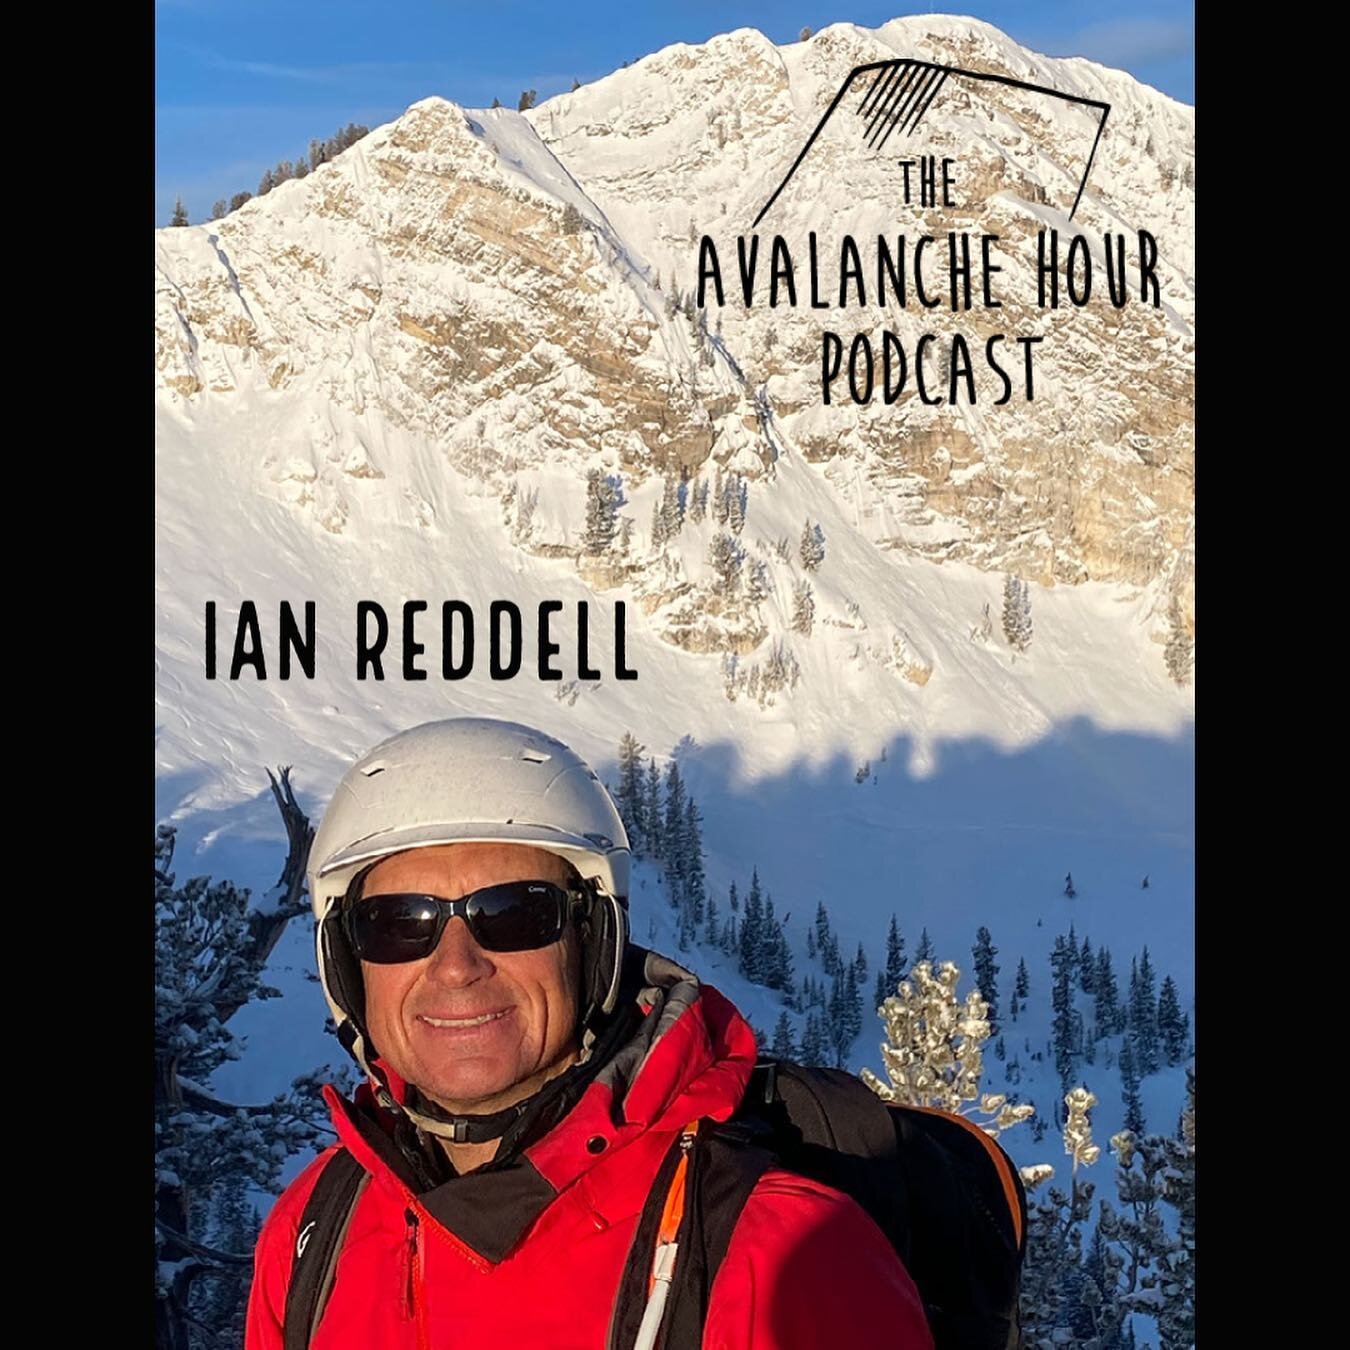 I sit down with Ian Reddell in this episode. Skiing Ian is what we call him. Ian is the Avalanche Mitigation Manager at Solitude Mountain Resort. I had the good fortune to work with Ian while I was ski patrolling at Solitude, and he has been a mentor